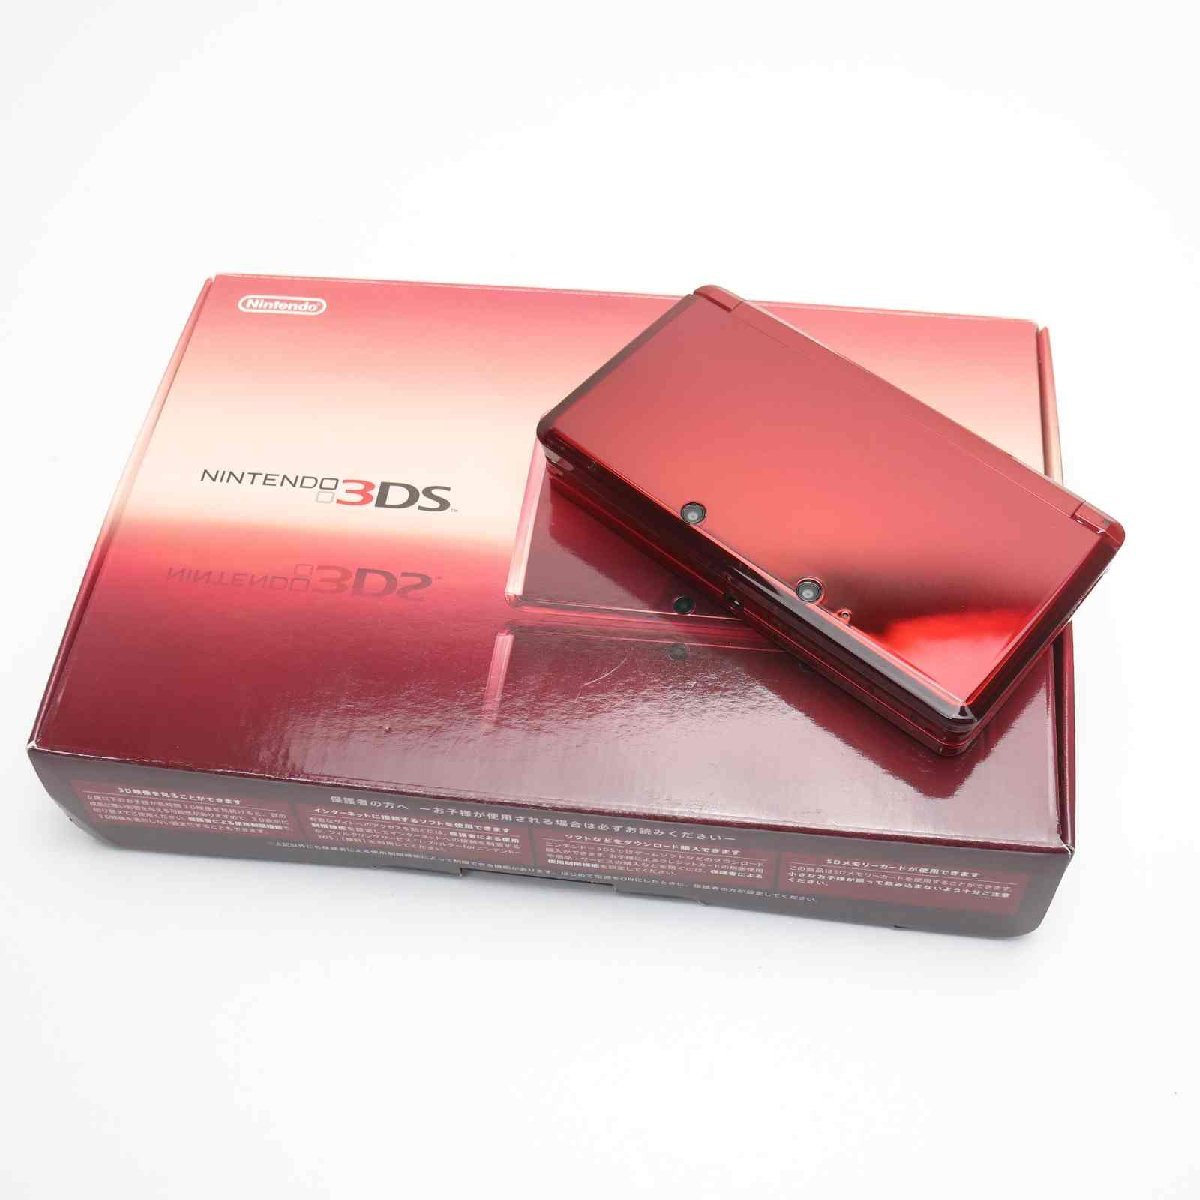  new goods unused Nintendo 3DS flair red body same day shipping game nintendo body .... Saturday, Sunday and public holidays shipping OK